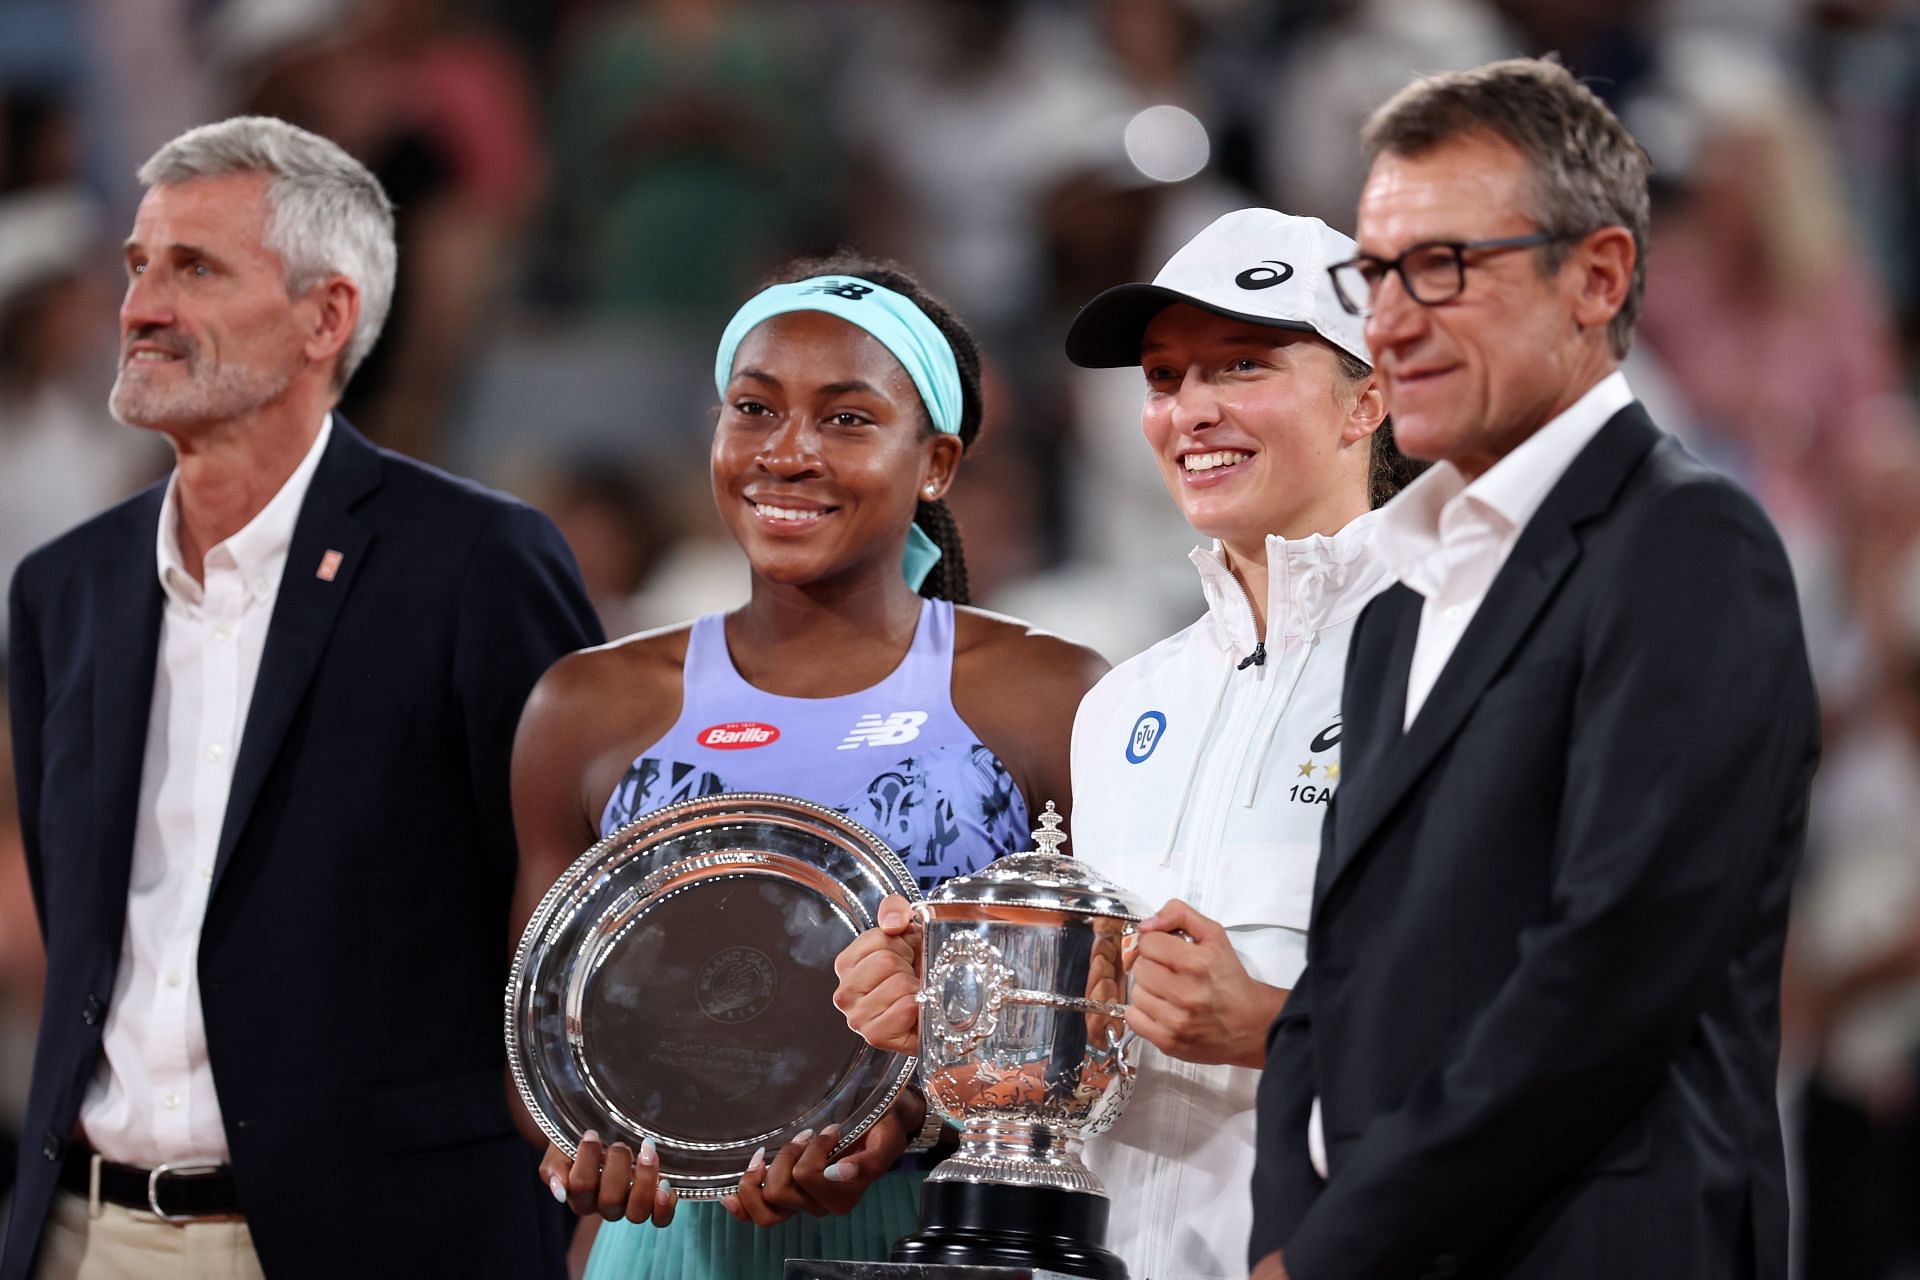 Swiatek and Gauff pose after the French Open finals